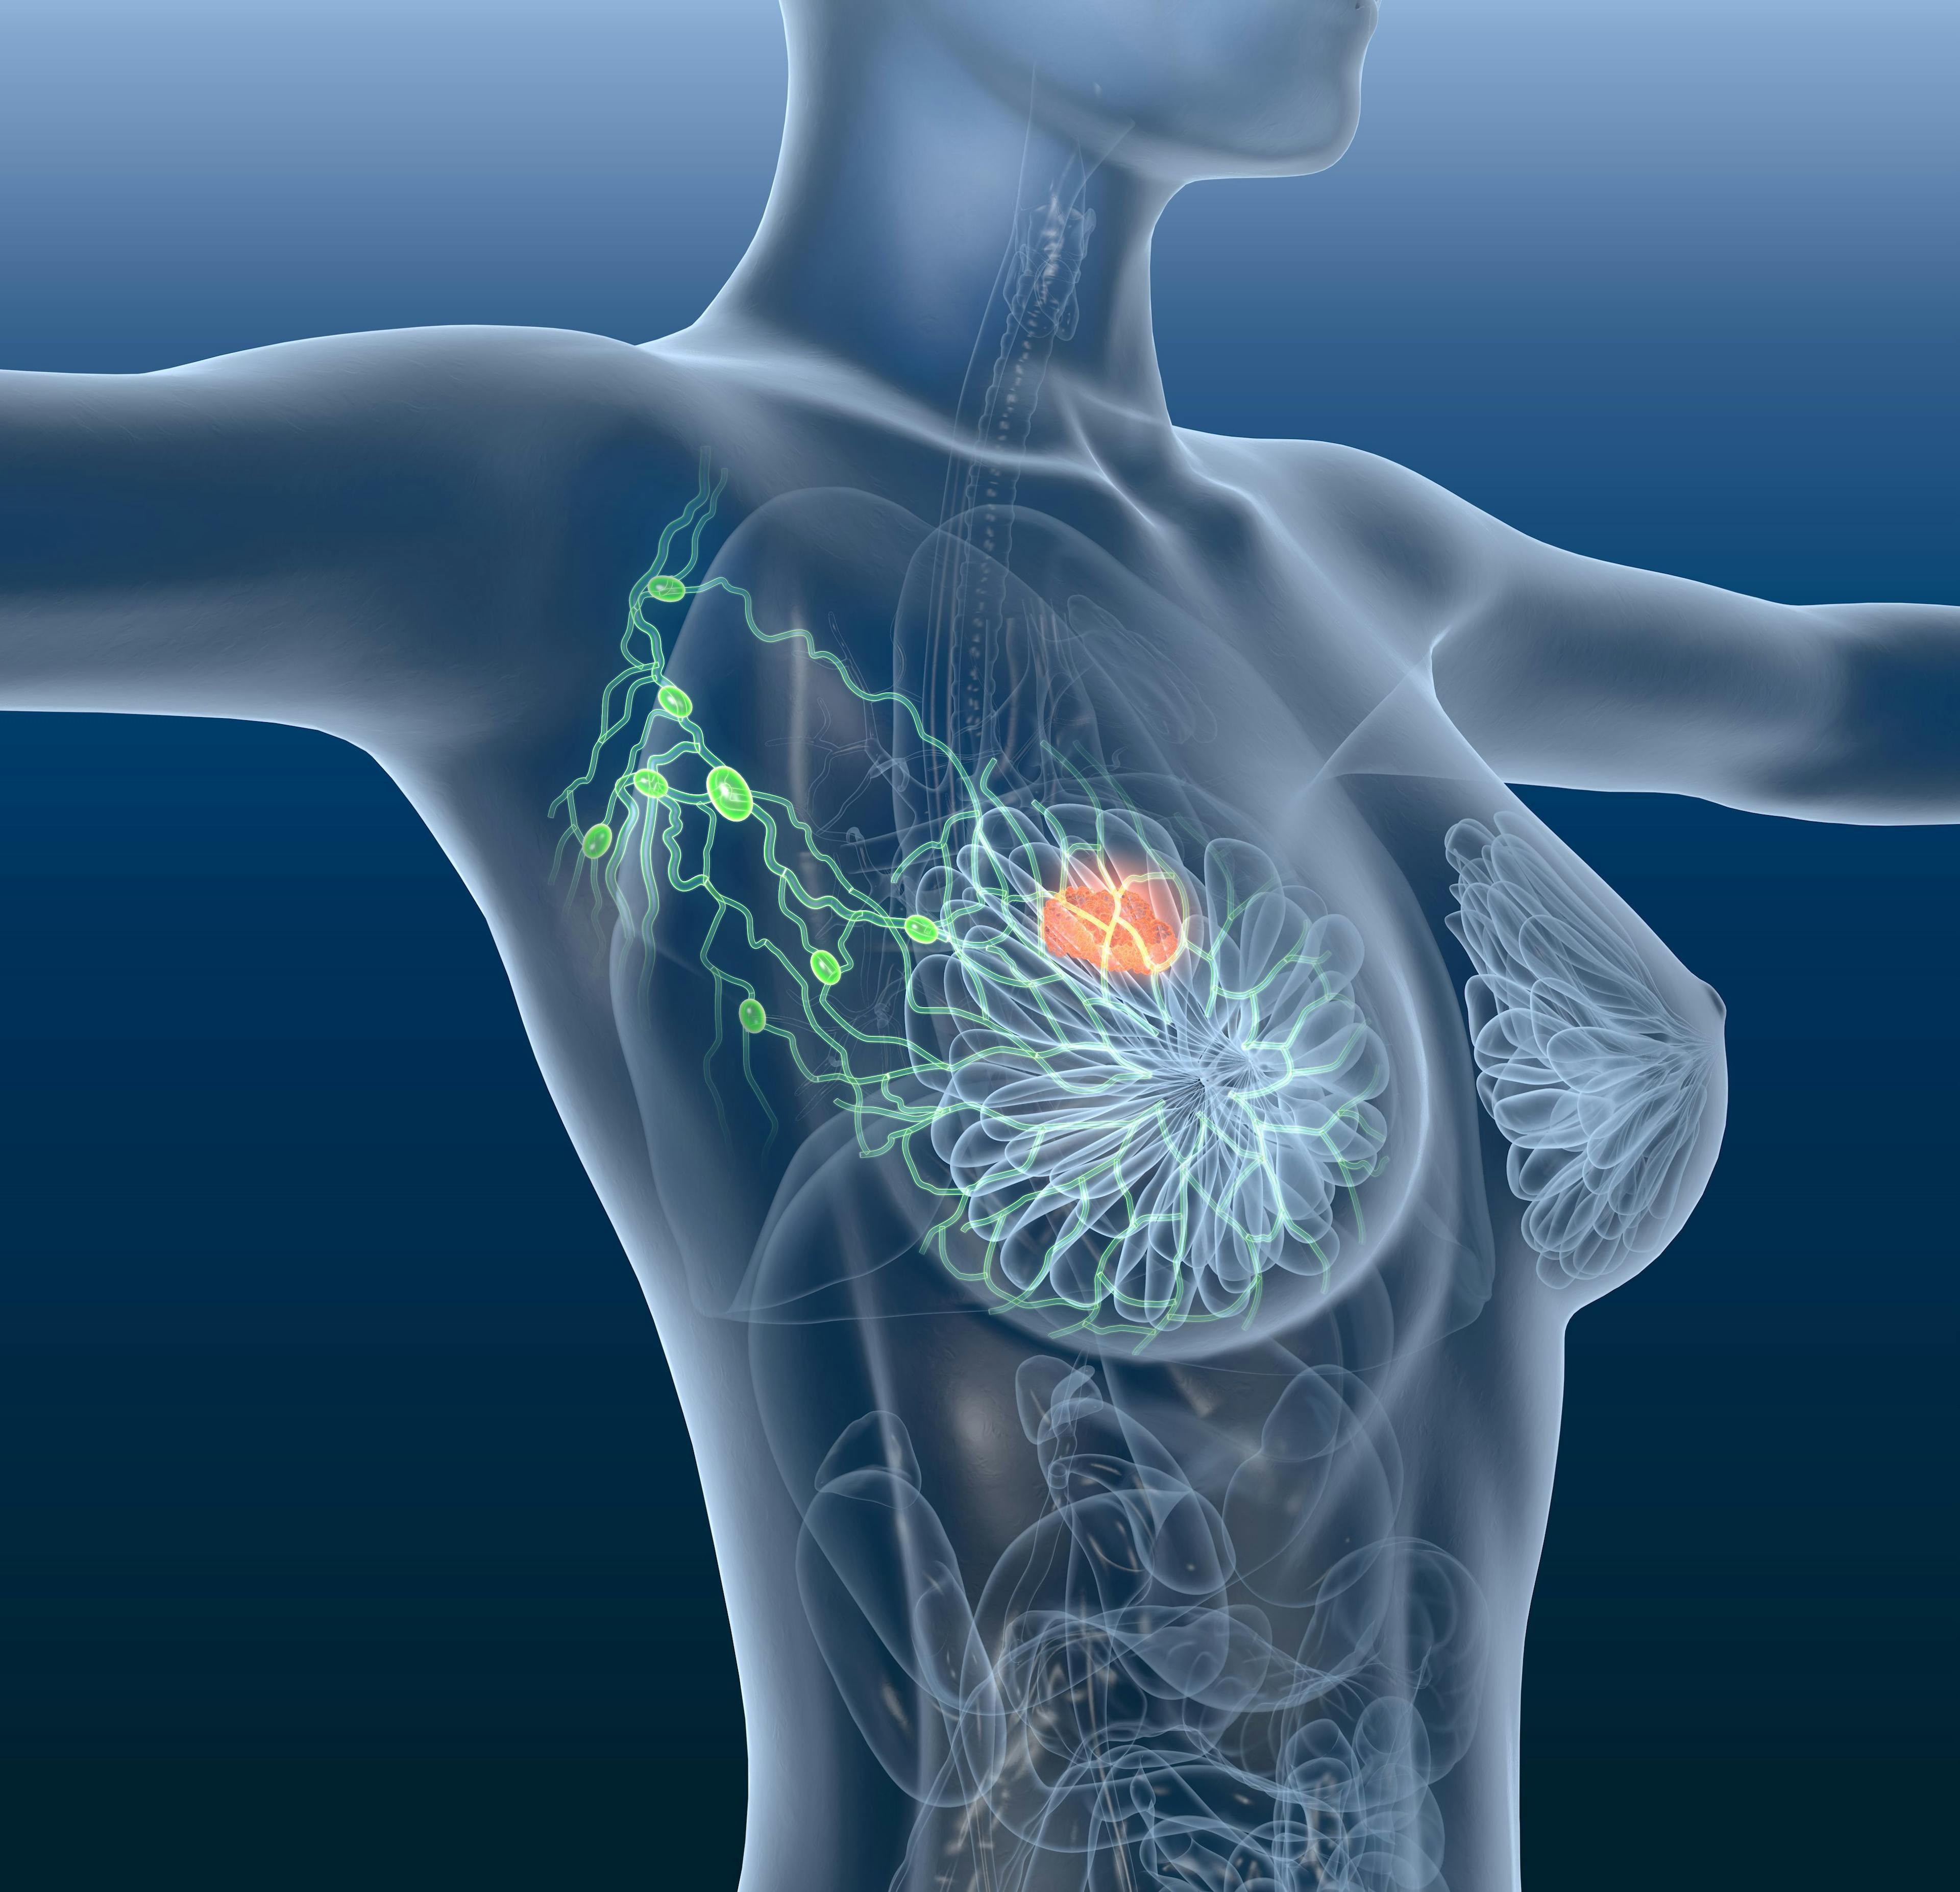 Data collected from 1400 global laboratories indicate that standard immunohistochemistry testing may not be the most effective method to identify patients with breast cancer with HER2-low disease.